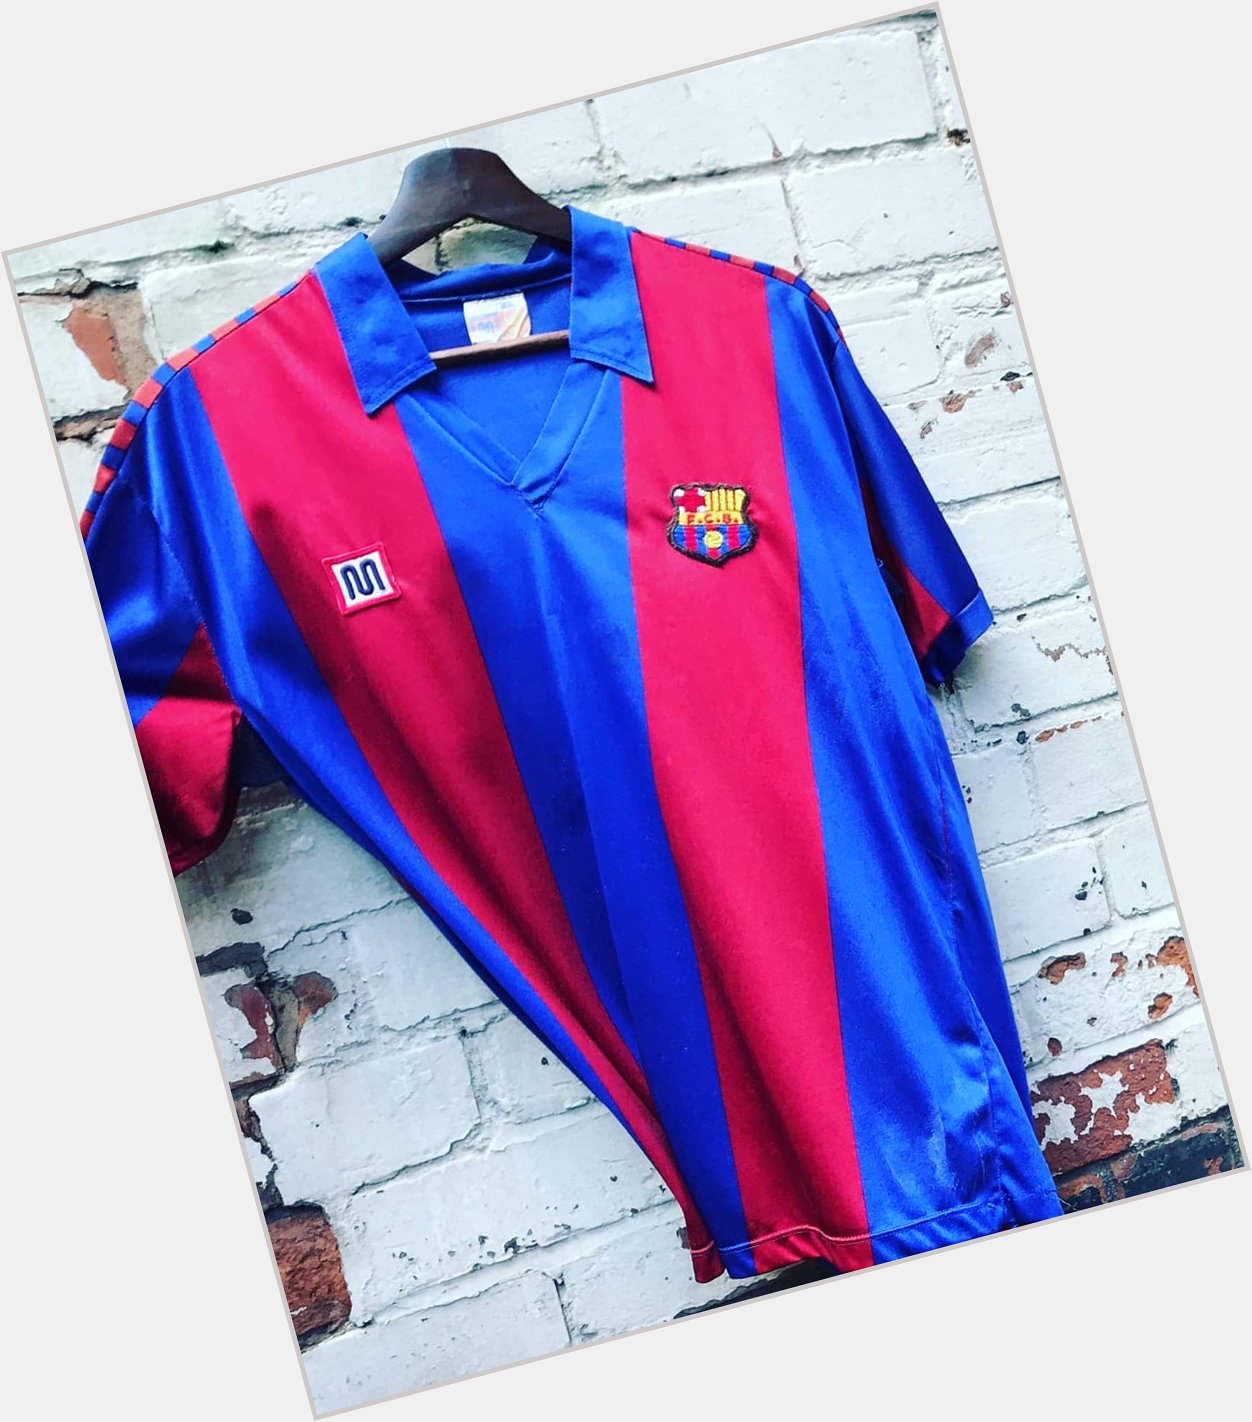 Happy Birthday to Mark Hughes, who turns 55 today Here is one of his match worn shirts from his Barcelona days. 